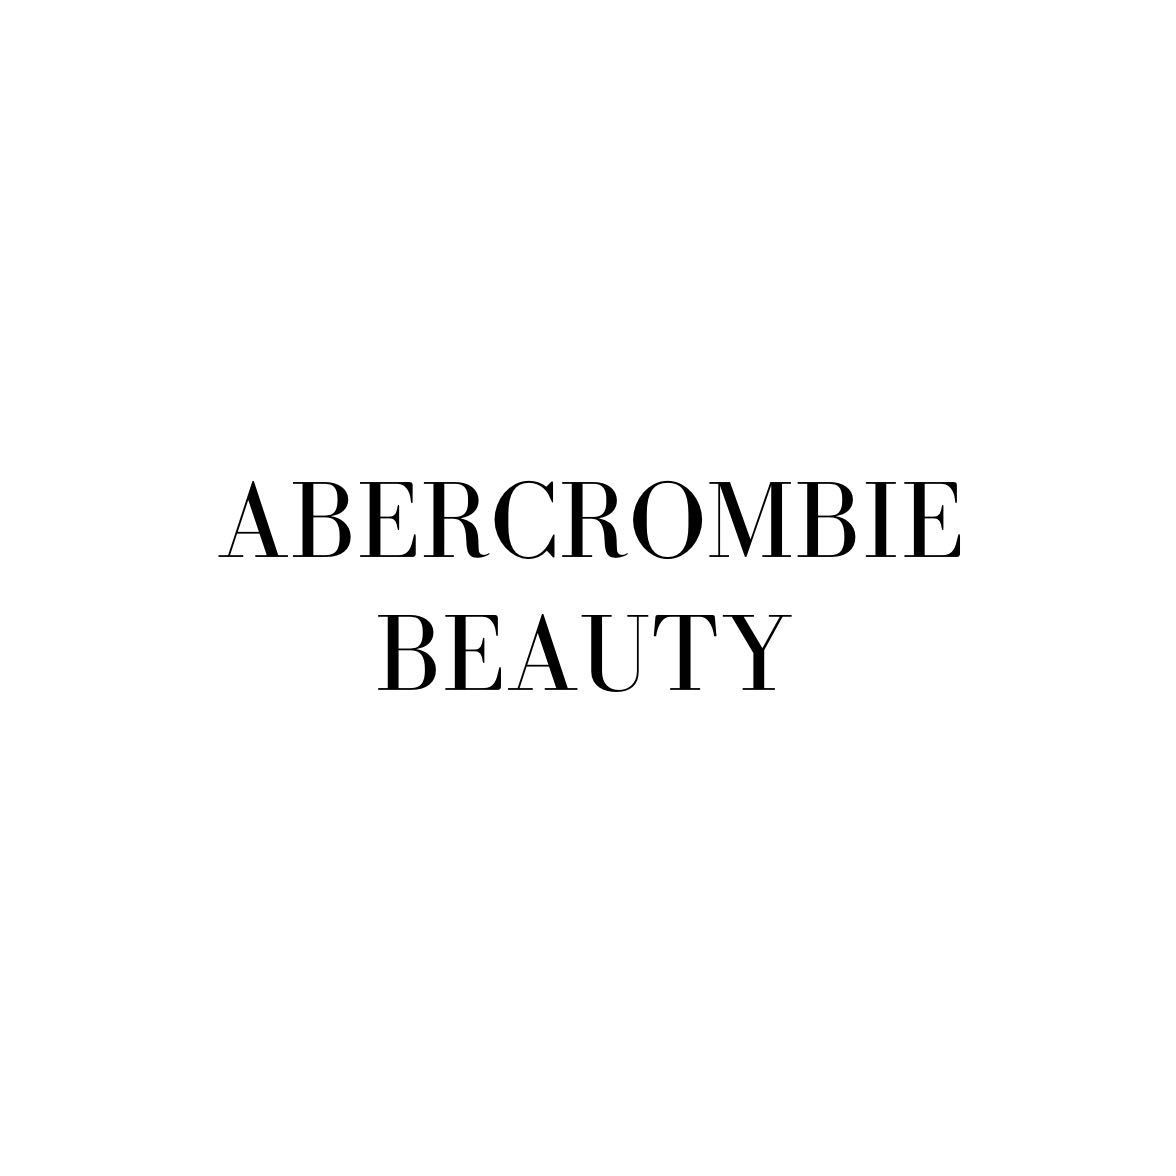 Abercrombie Beauty, Grimsby Road, DN35 7QL, Cleethorpes